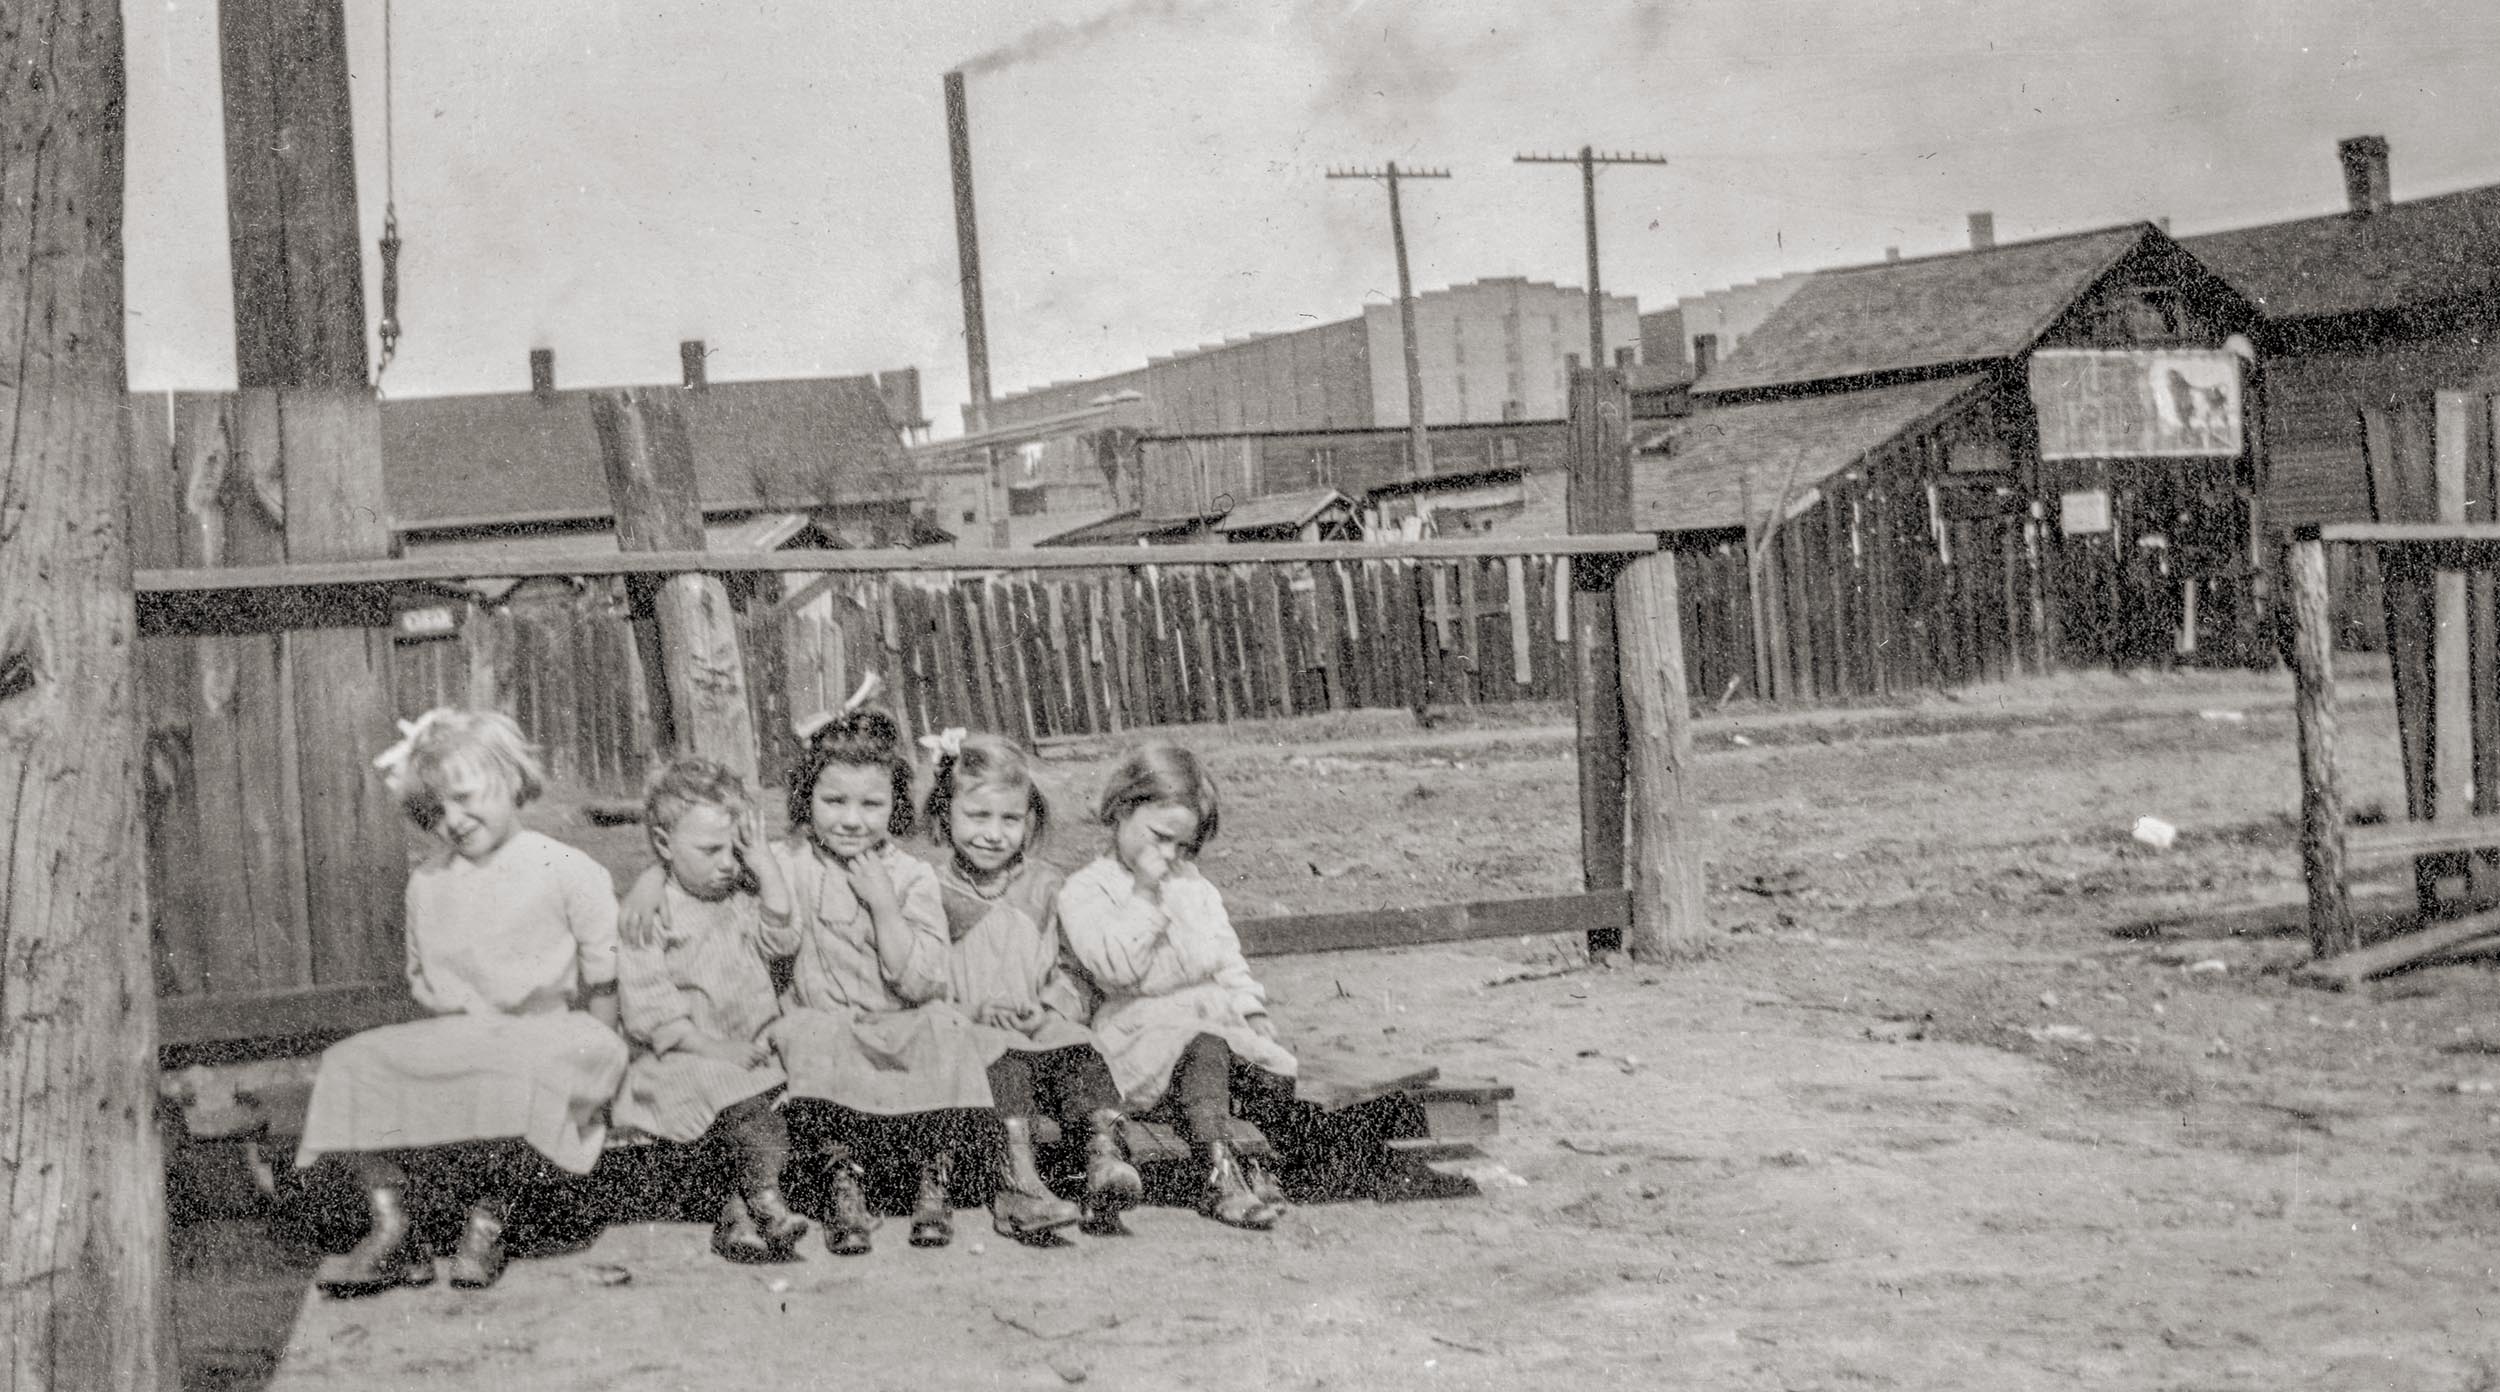 A group of girls posing for a photo, before being transported to a dinner meal at the Peoria, Illinois, Neighborhood House, which delivered meals to the elderly and fed children in a cafeteria.

The girls lived in the slums at Cinder Point between the Railroad and Illinois River, at the foot of Sanger Street, nearby the Flatboat City locale, Peoria, Illinois, circa mid-1930s. The Hiram Walker & Sons Distillery plant can be seen in the background. Picture taken by an unknown employee of the Neighborhood House.